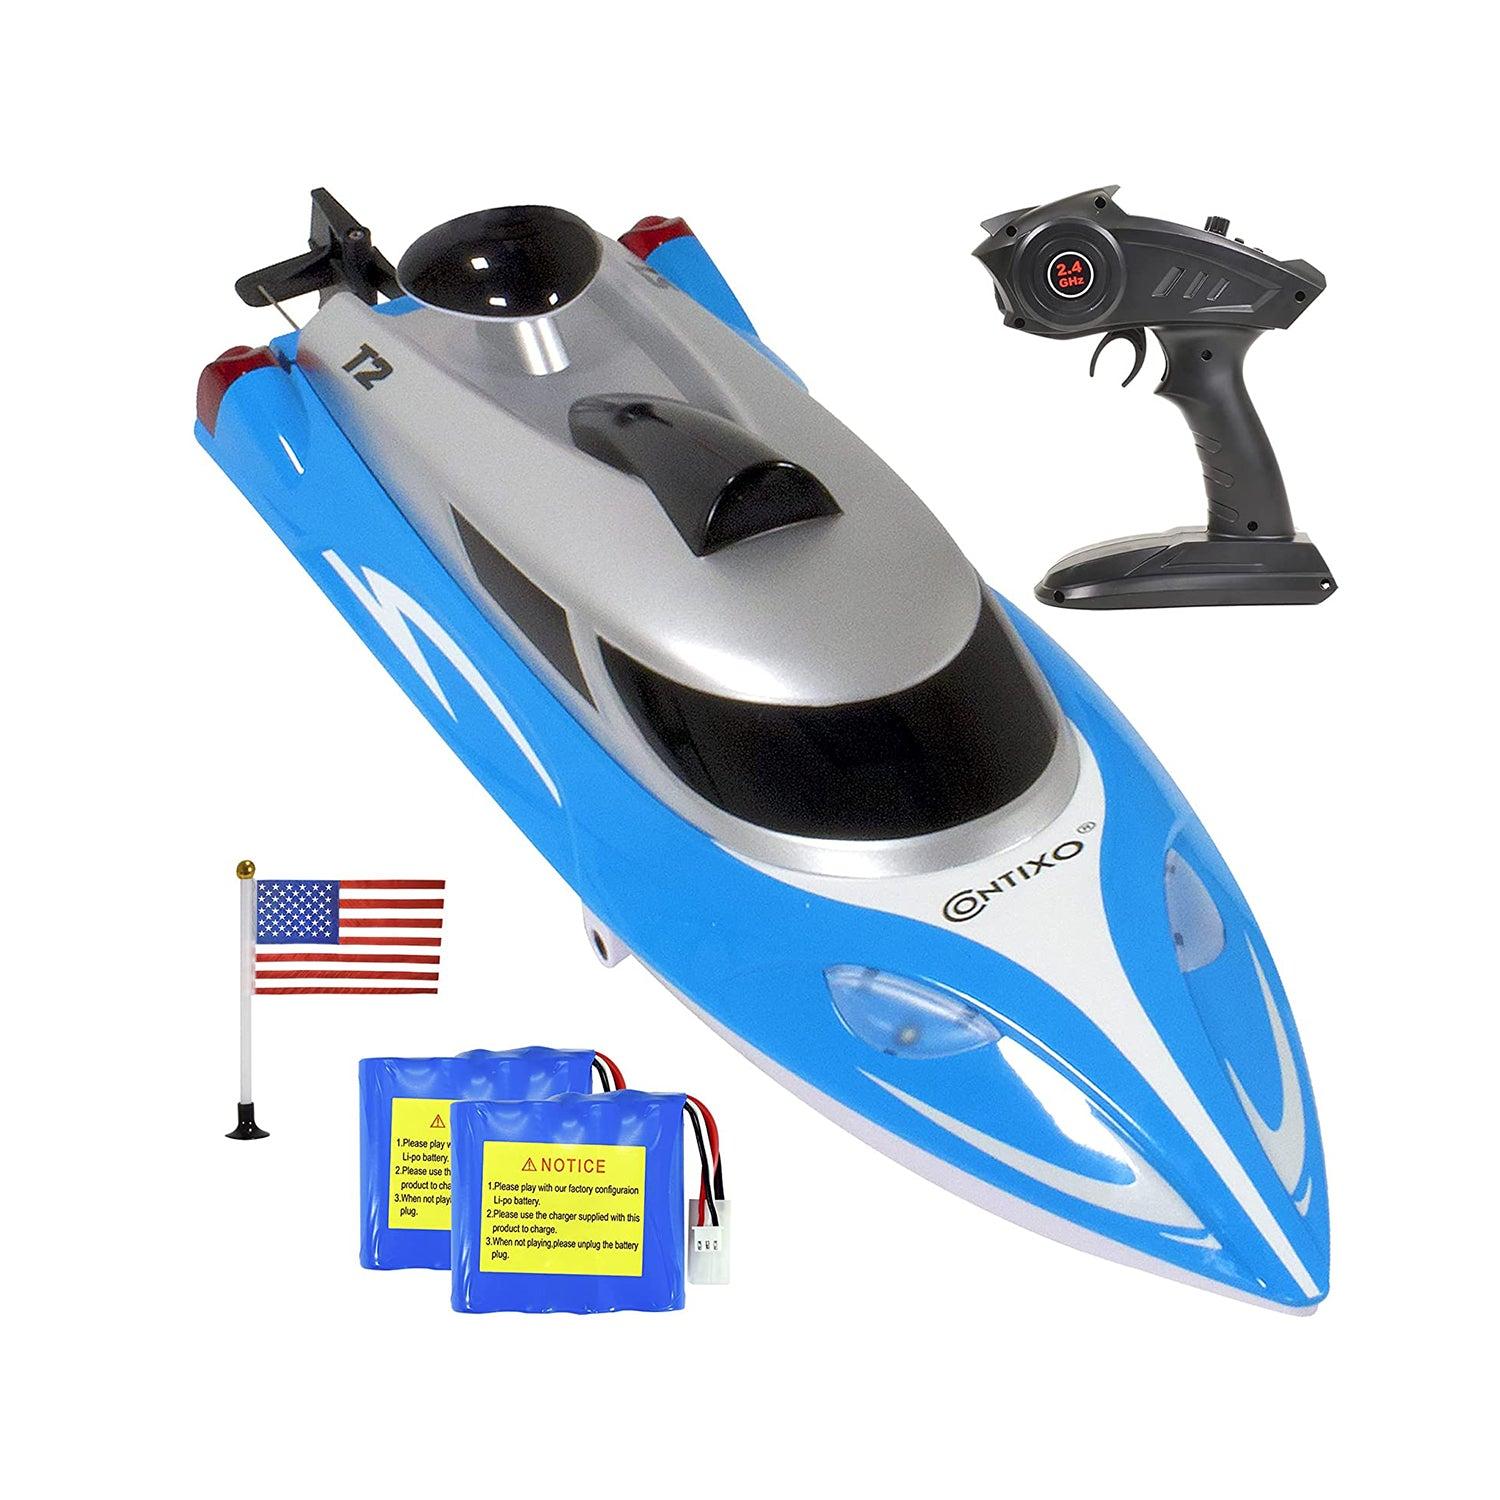 Contixo T1 Rc Boat: Perfect for fun and learning